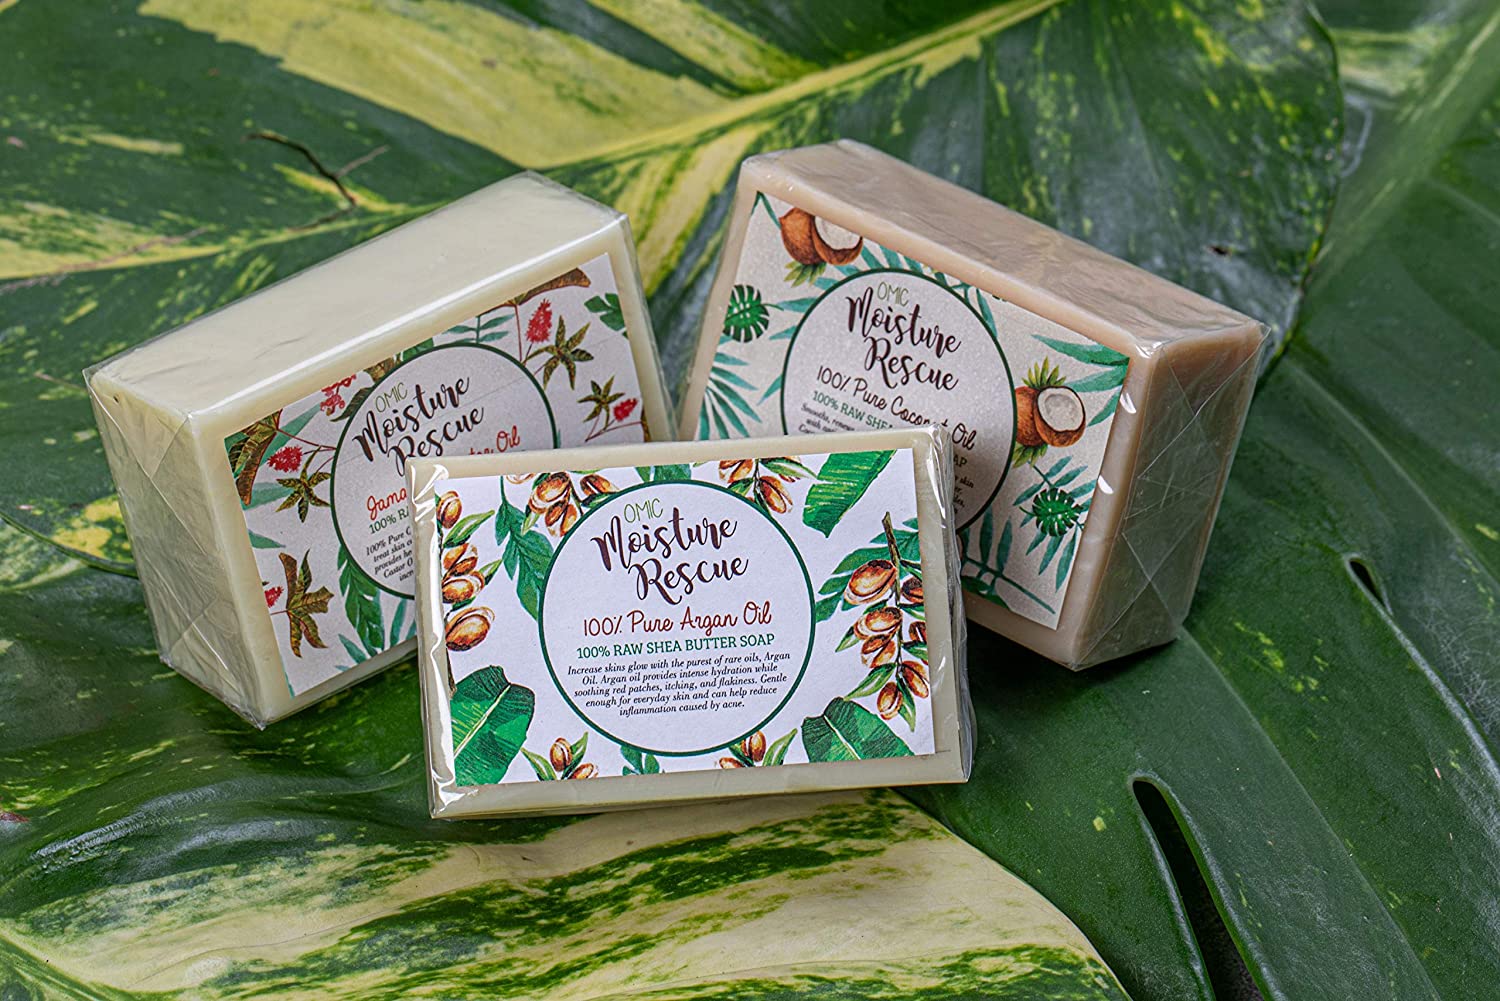 Moisture Rescue Shea Butter Soap with Argan Oil – Mitchell Brands Europe